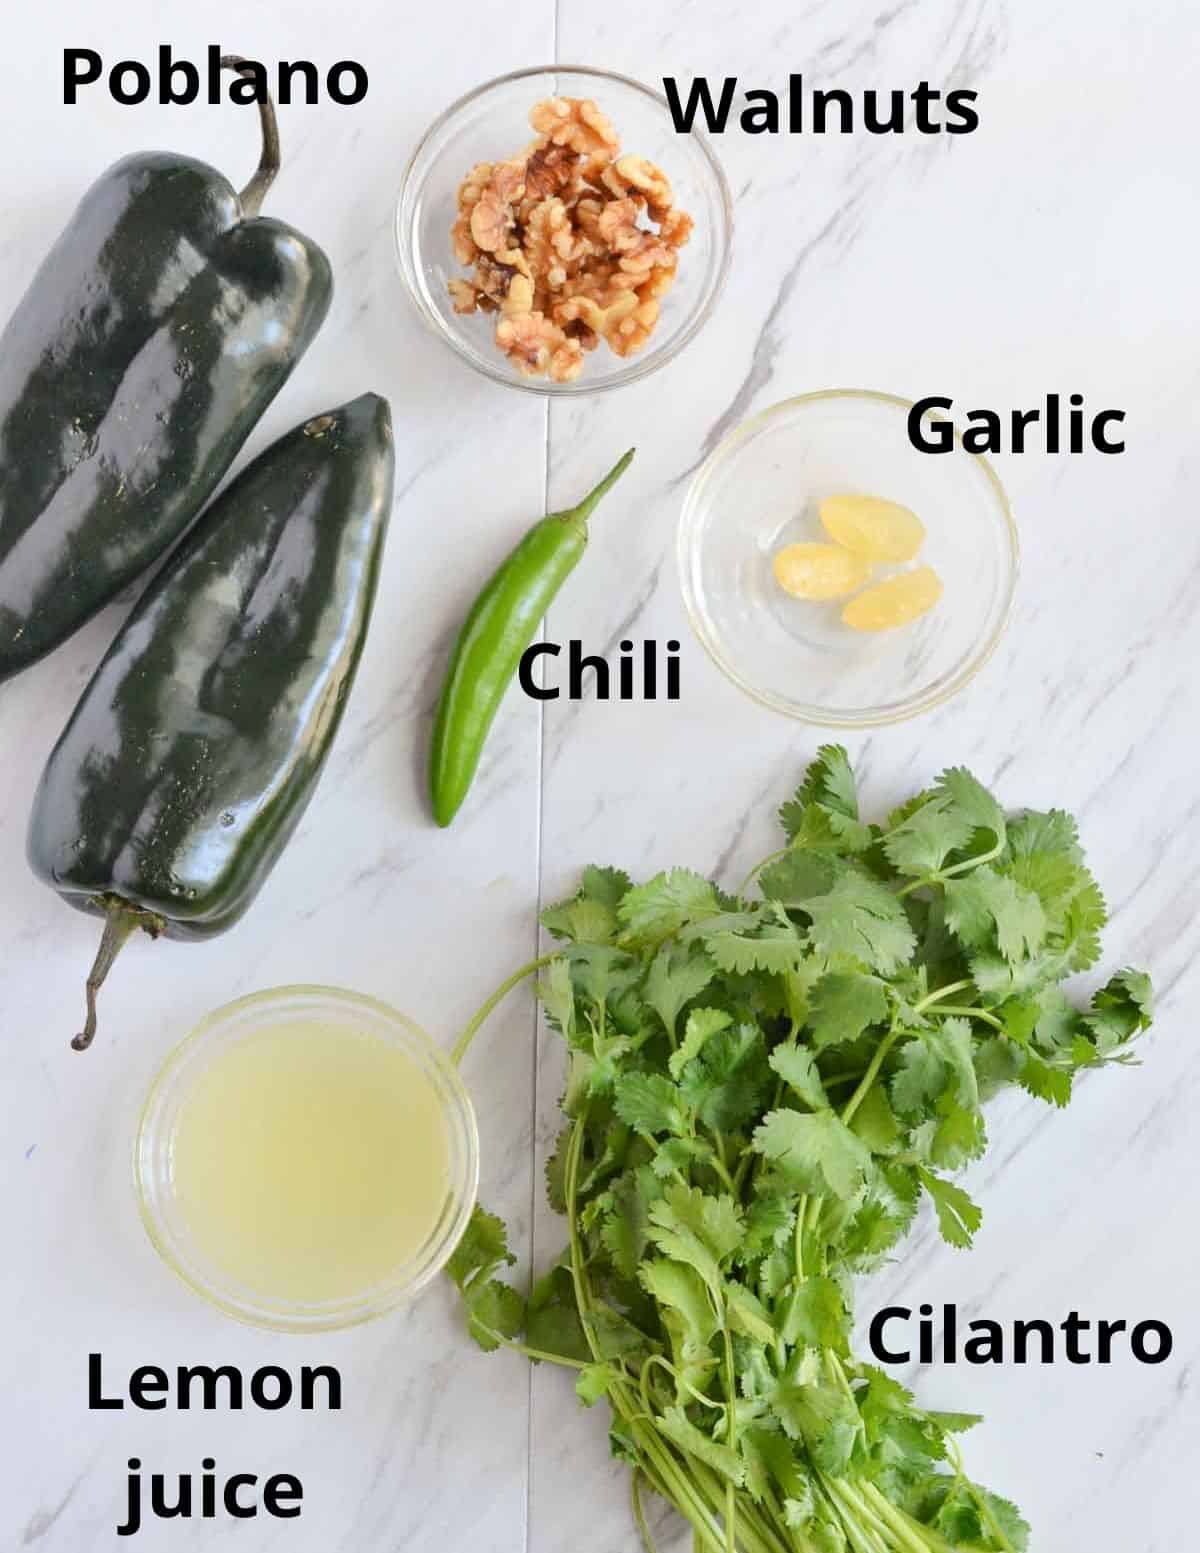 ingredients listed to make the pesto